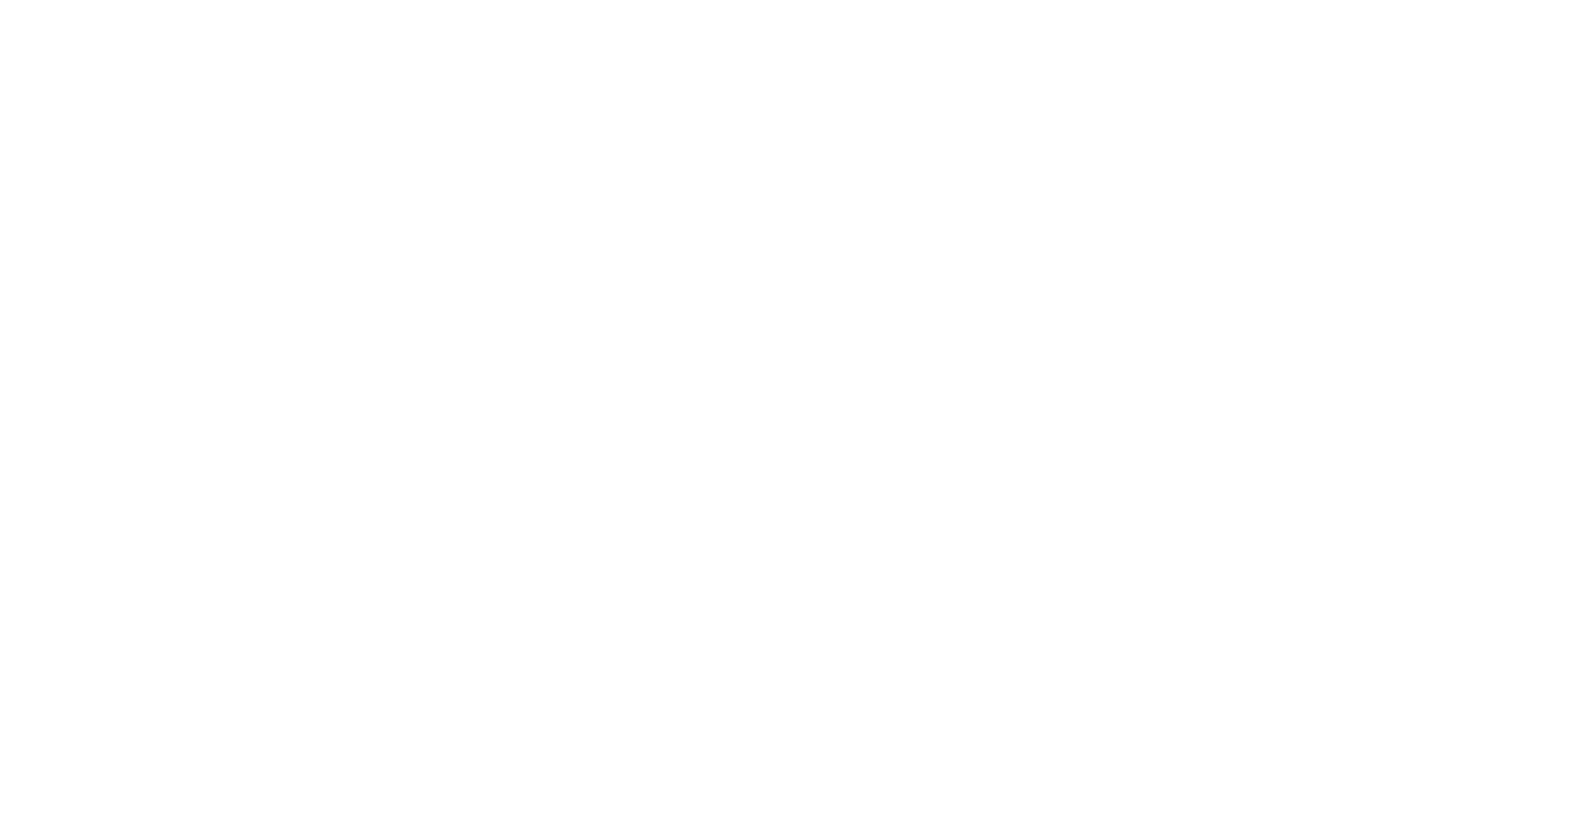 TherapeuticsMD logo for dark backgrounds (transparent PNG)